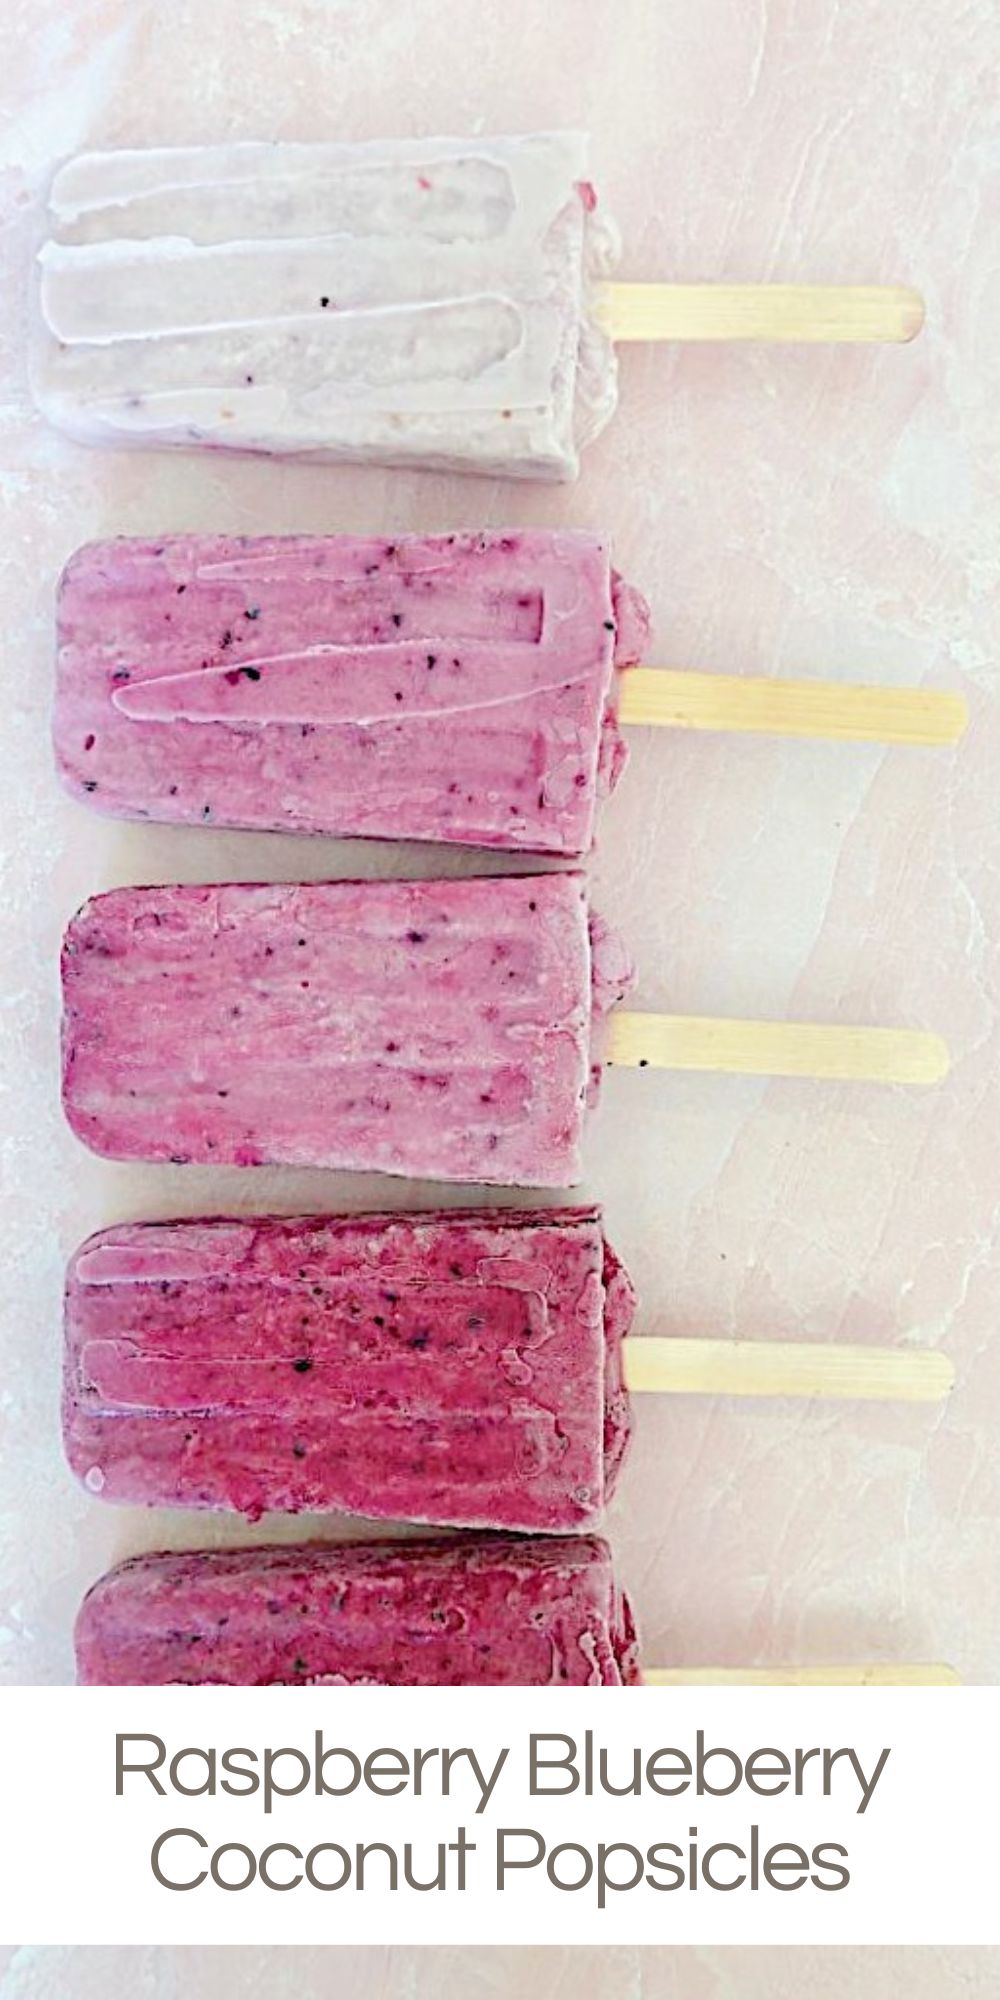 The weather is still hot so I made these Raspberry Blueberry Coconut Popsicles. They are healthy and the best popsicles!